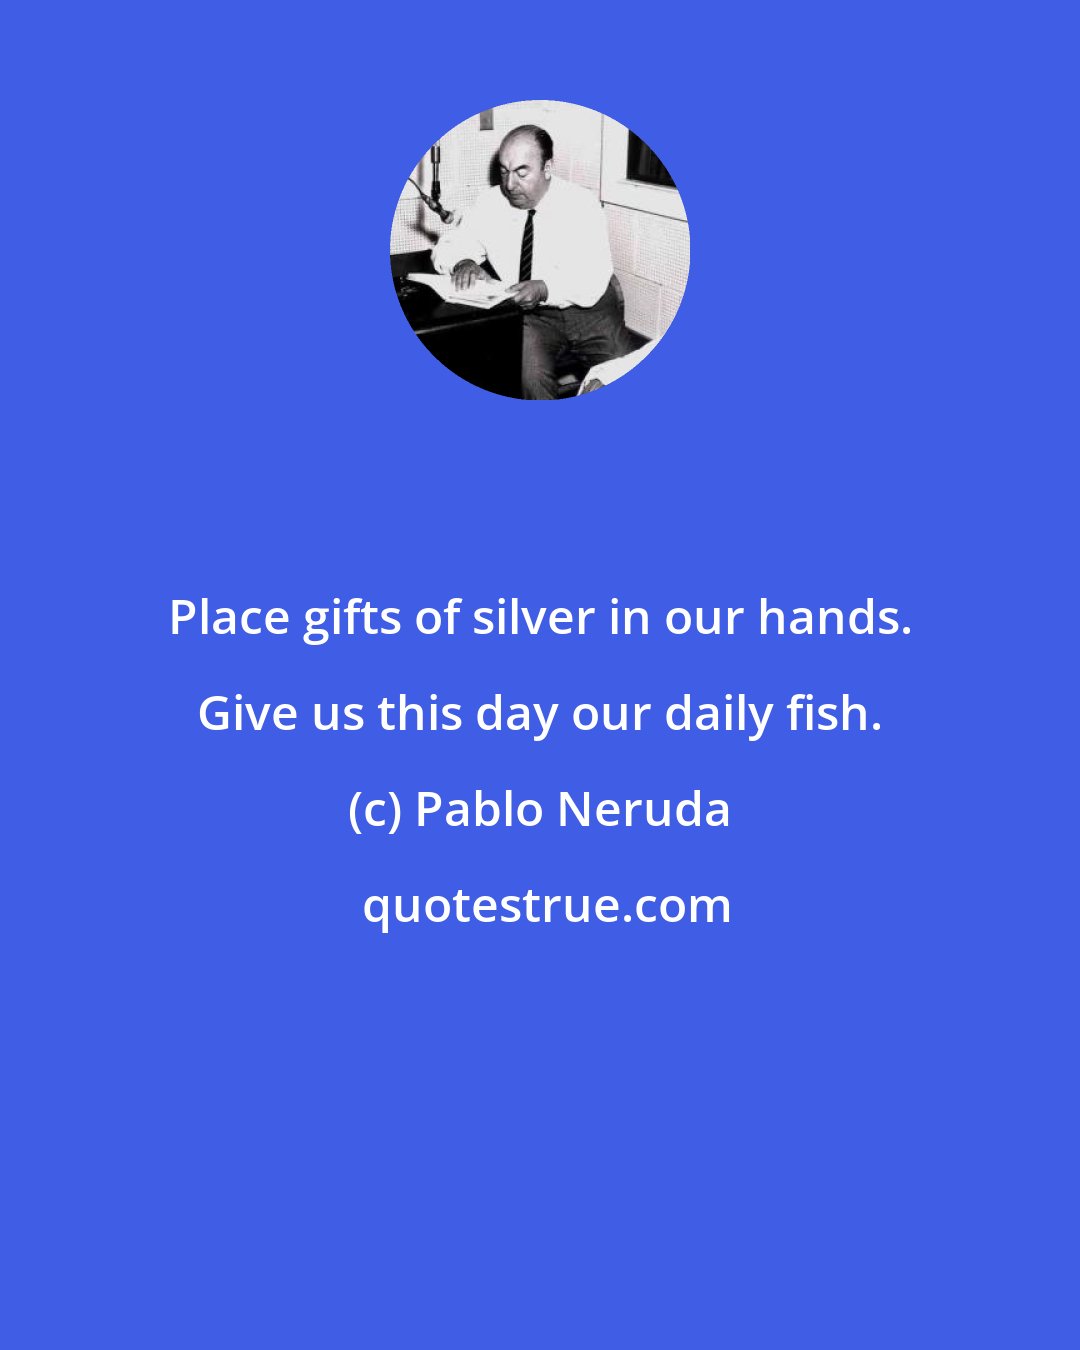 Pablo Neruda: Place gifts of silver in our hands. Give us this day our daily fish.